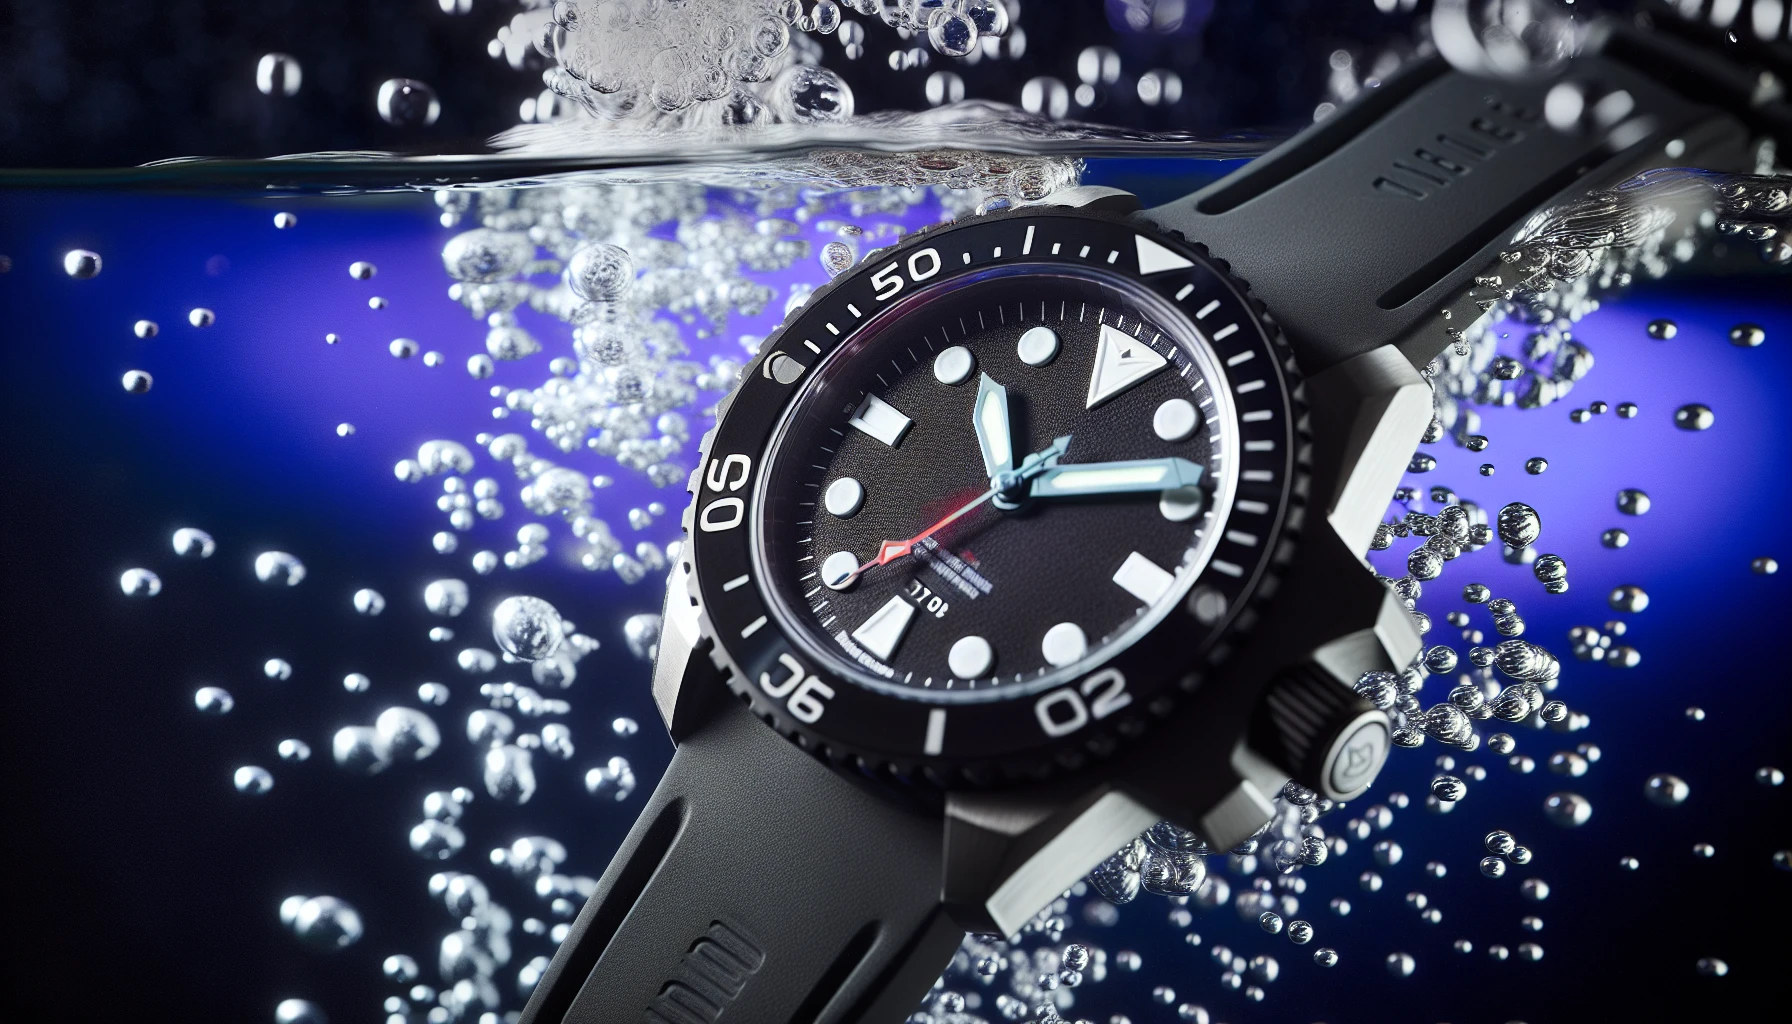 Dive watch with a rubber strap submerged in water